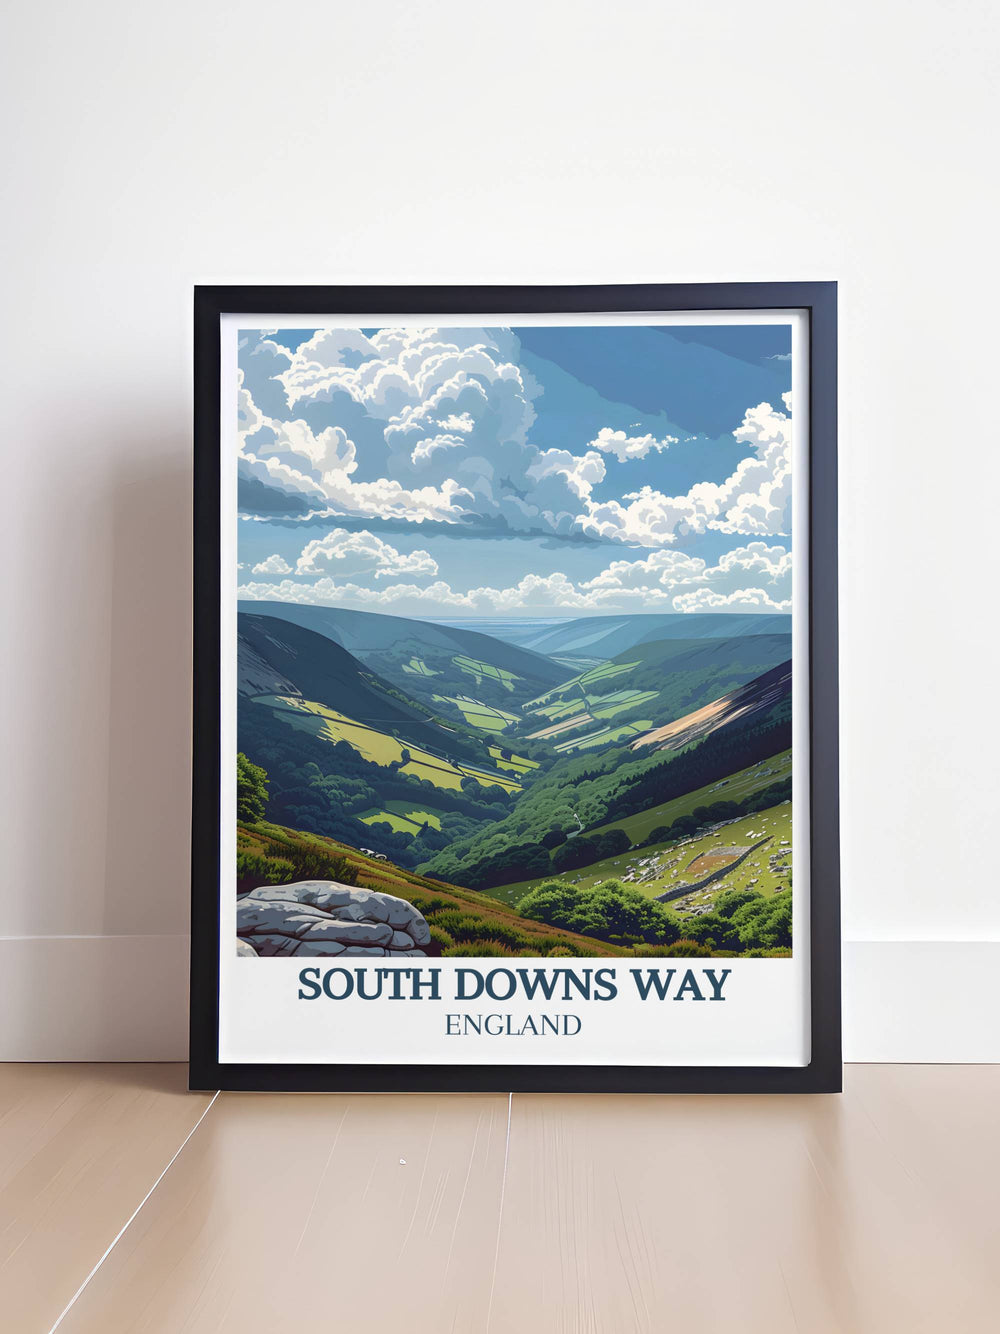 Experience the majestic beauty of Devils Dyke with our framed art, capturing the sweeping views and dramatic landscapes of this iconic location within the South Downs National Park.